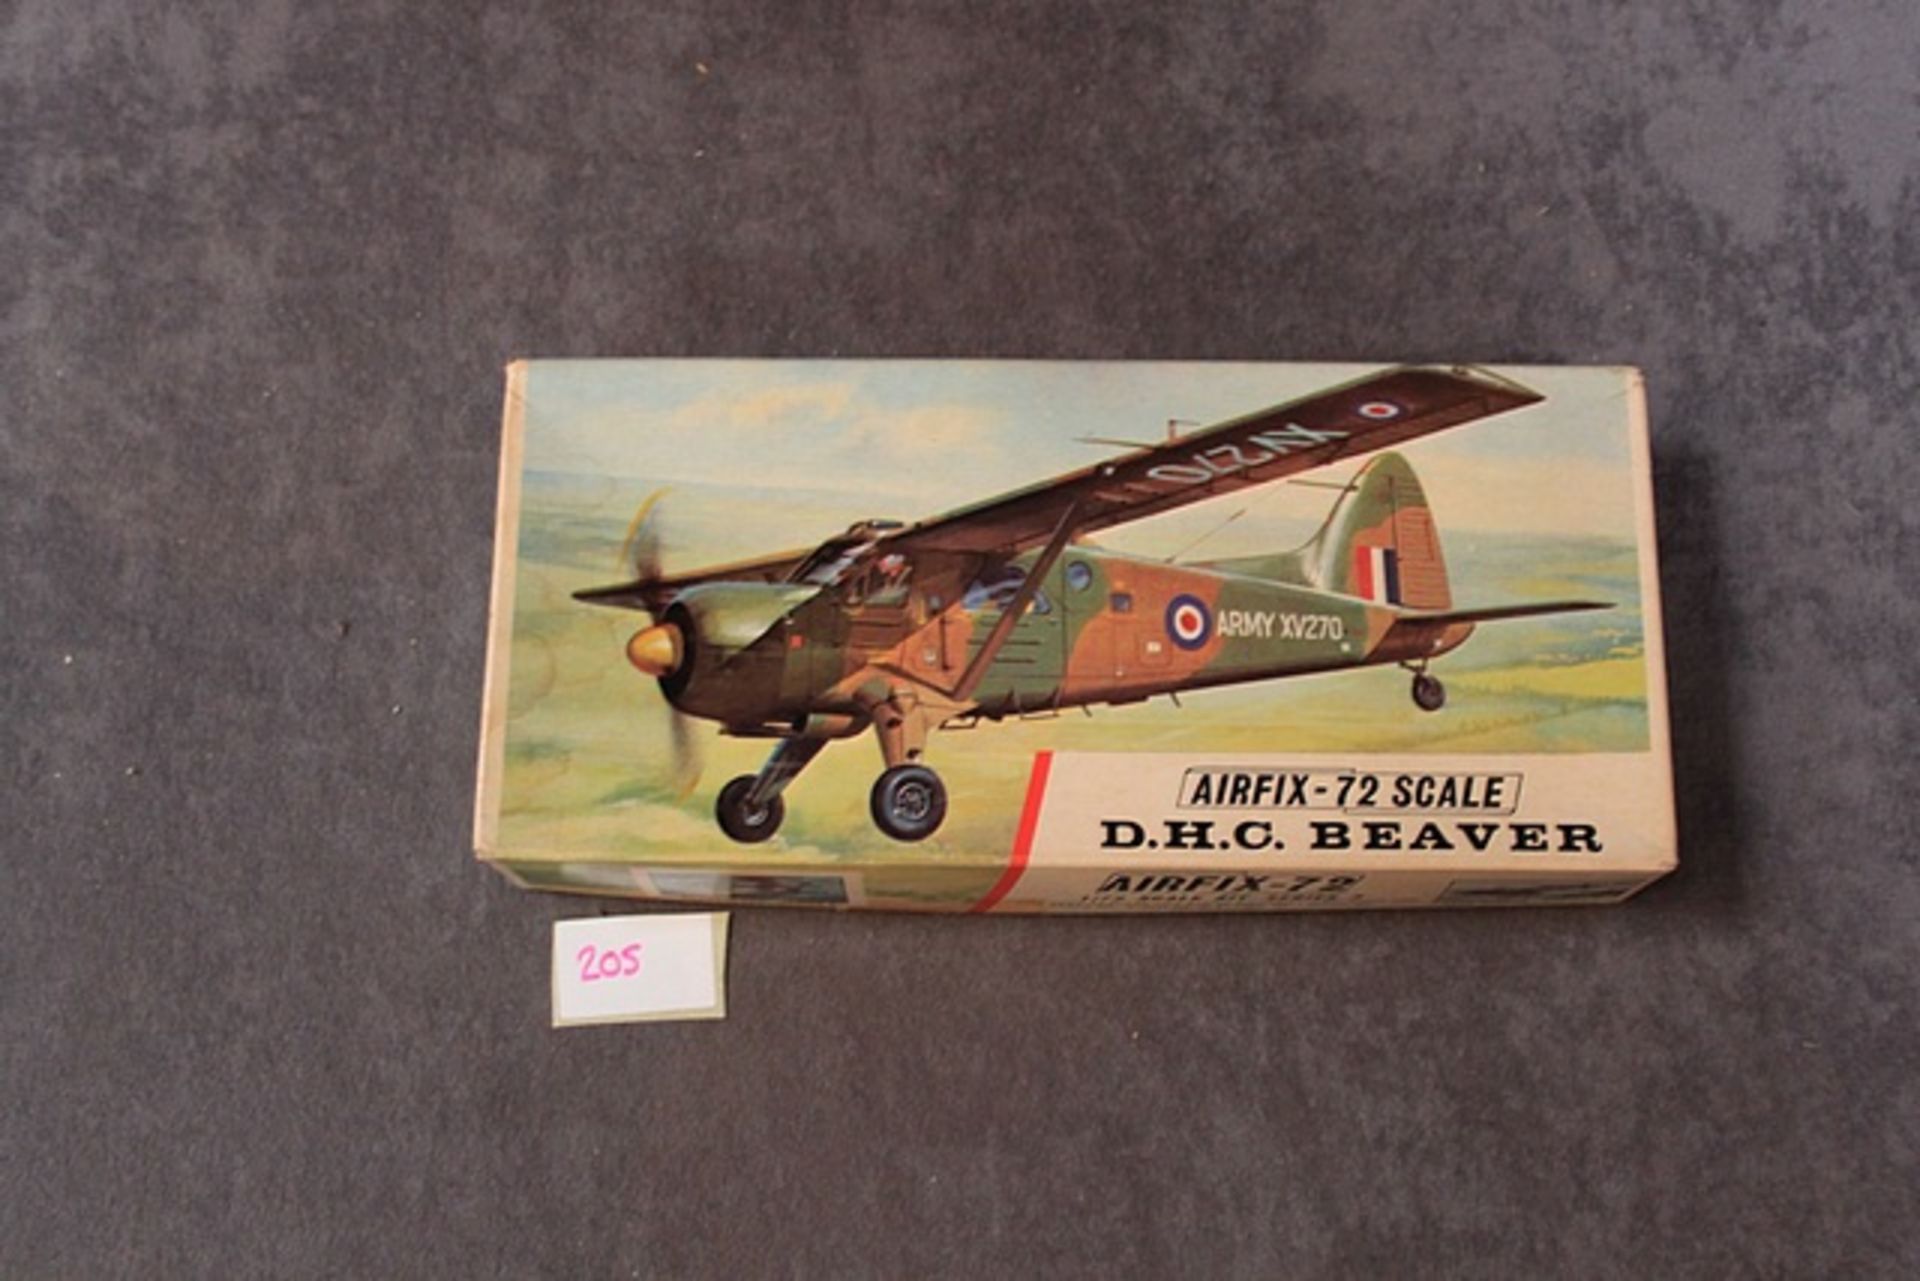 Airfix - 72 Scale D.H.C Beaver Pattern No 397 Series 3 On Sprues With Instructions In Box - Image 2 of 2